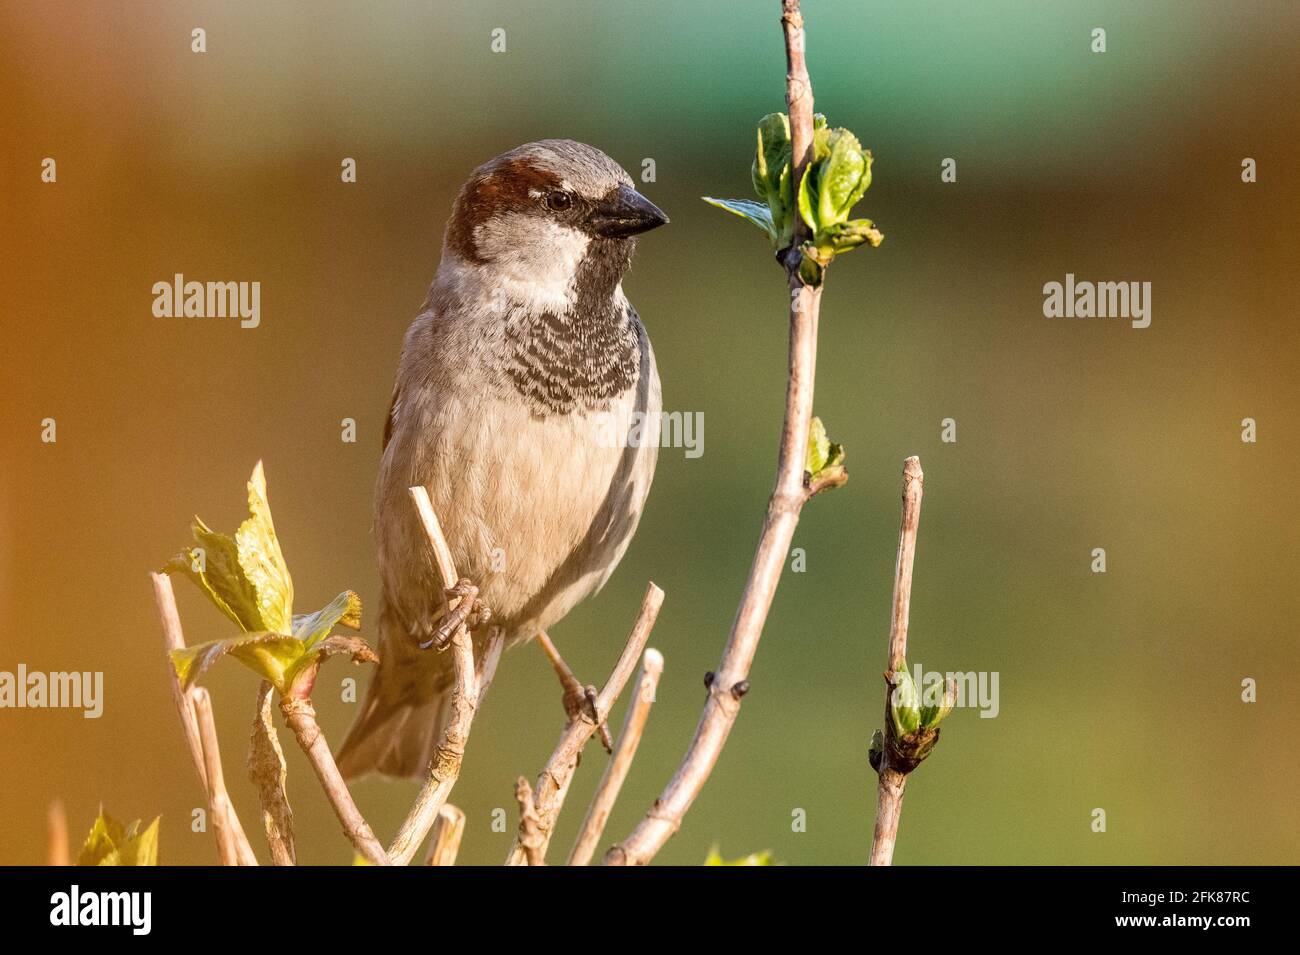 Male house sparrow sitting on a branch Stock Photo